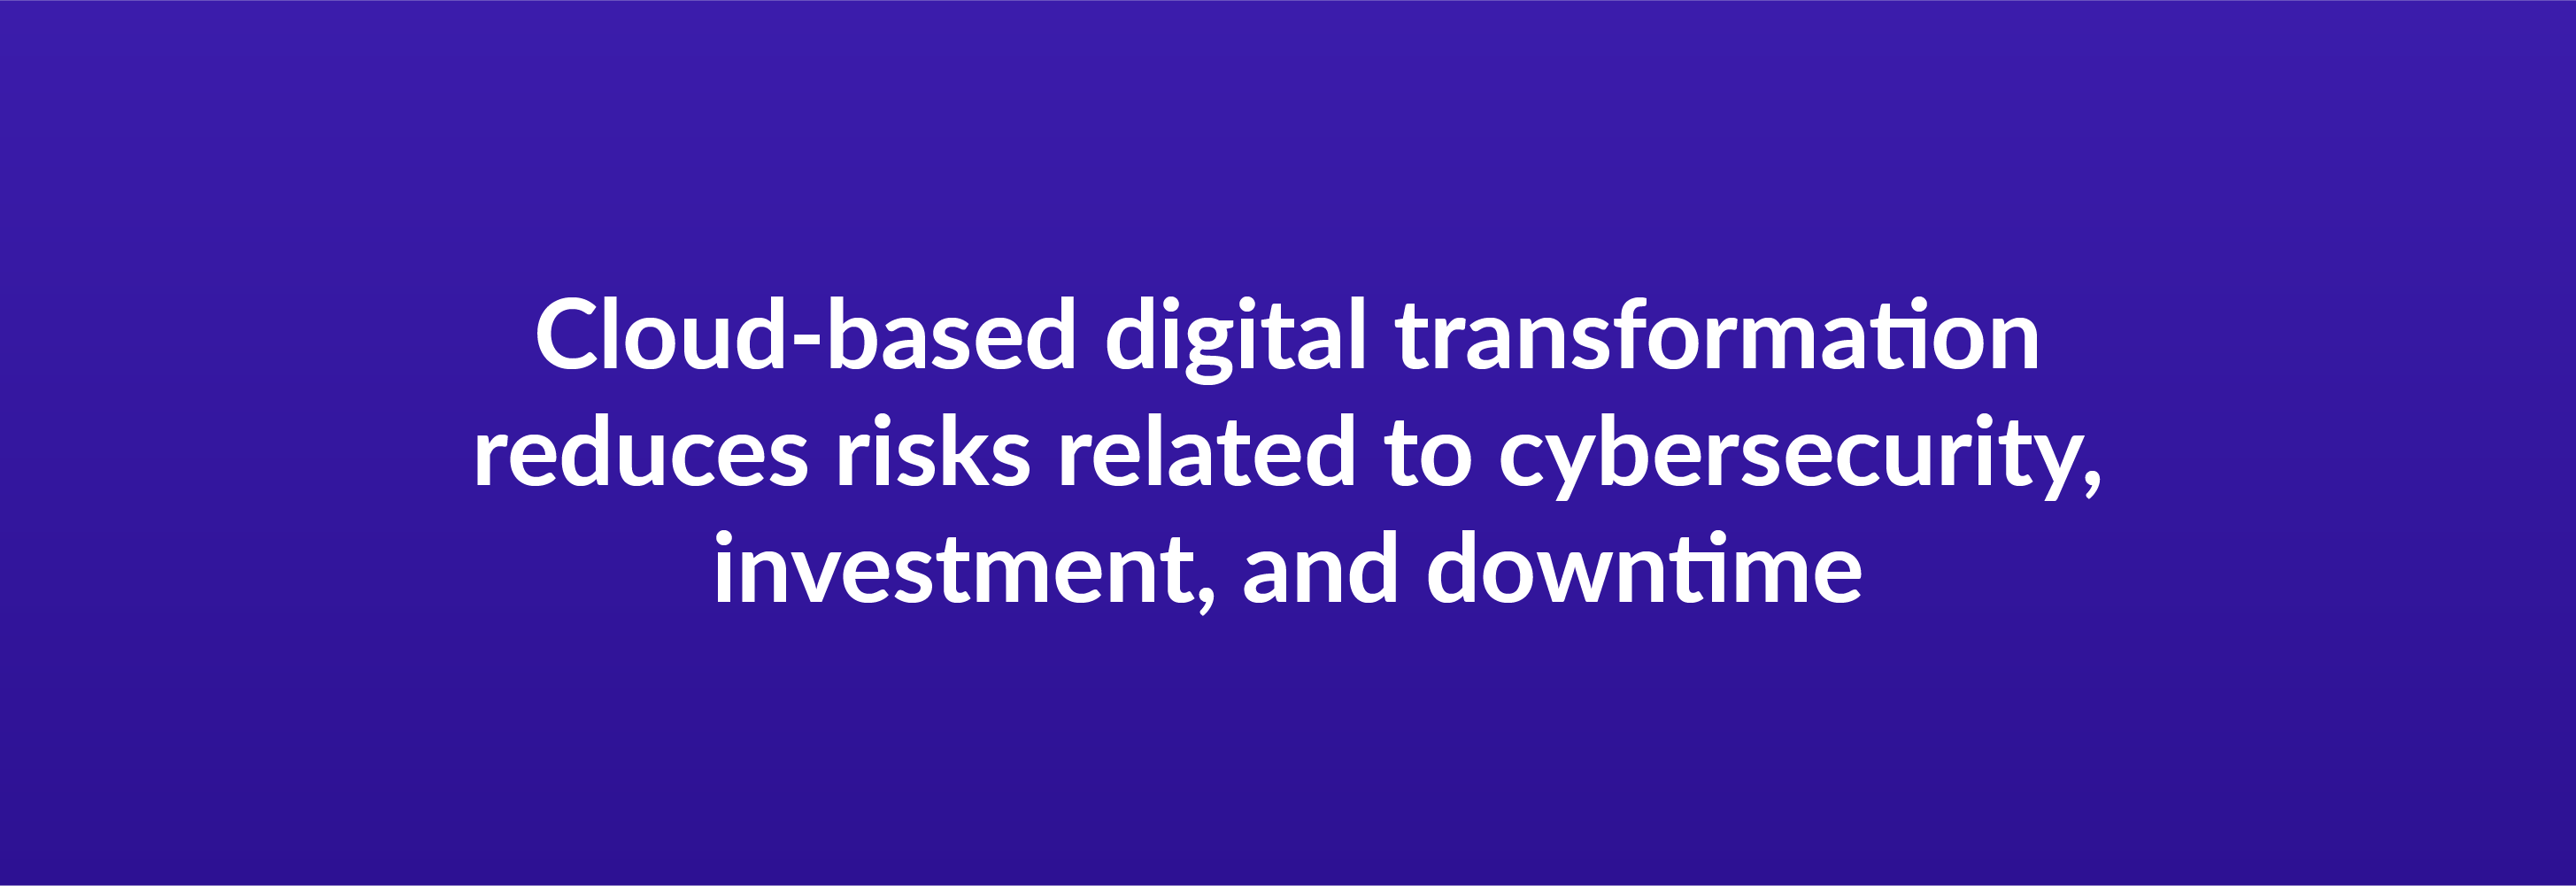 Cloud-based digital transformation reduces risks related to cybersecurity, investment, and downtime